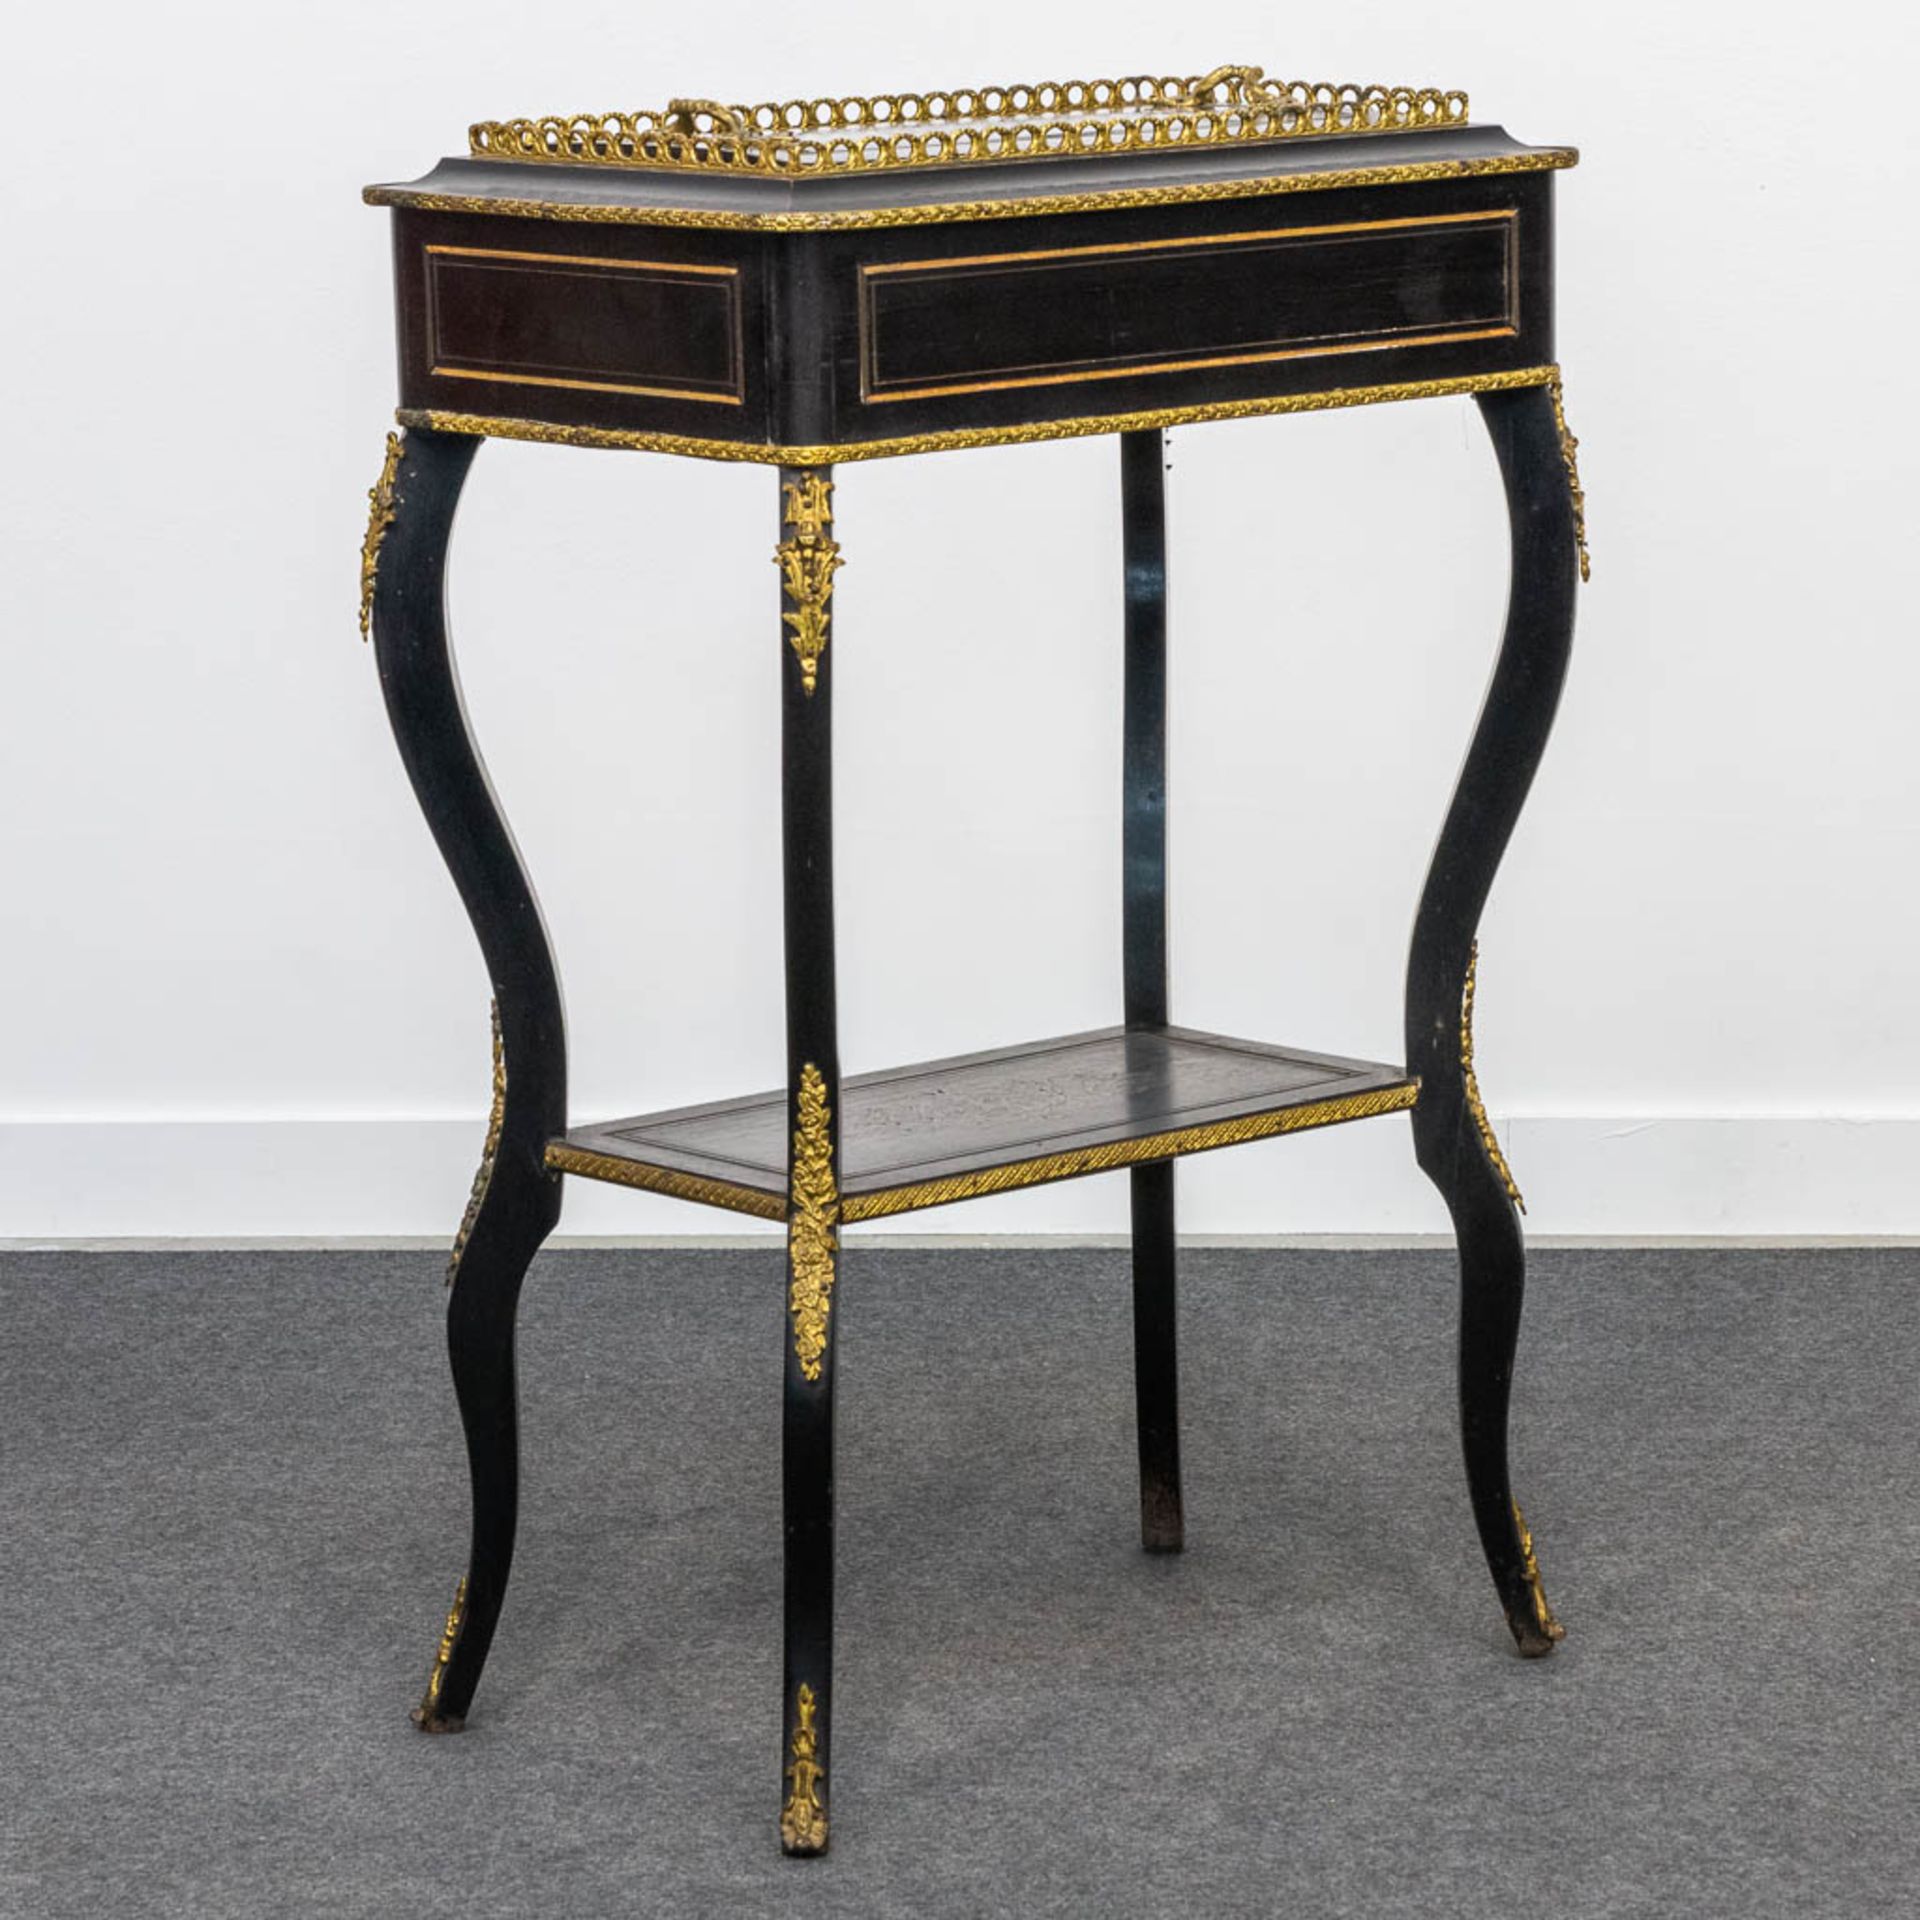 A Napoleon 3 side table, mounted with ormolu bronze and finished with a serving tray. (35 x 55 x 82 